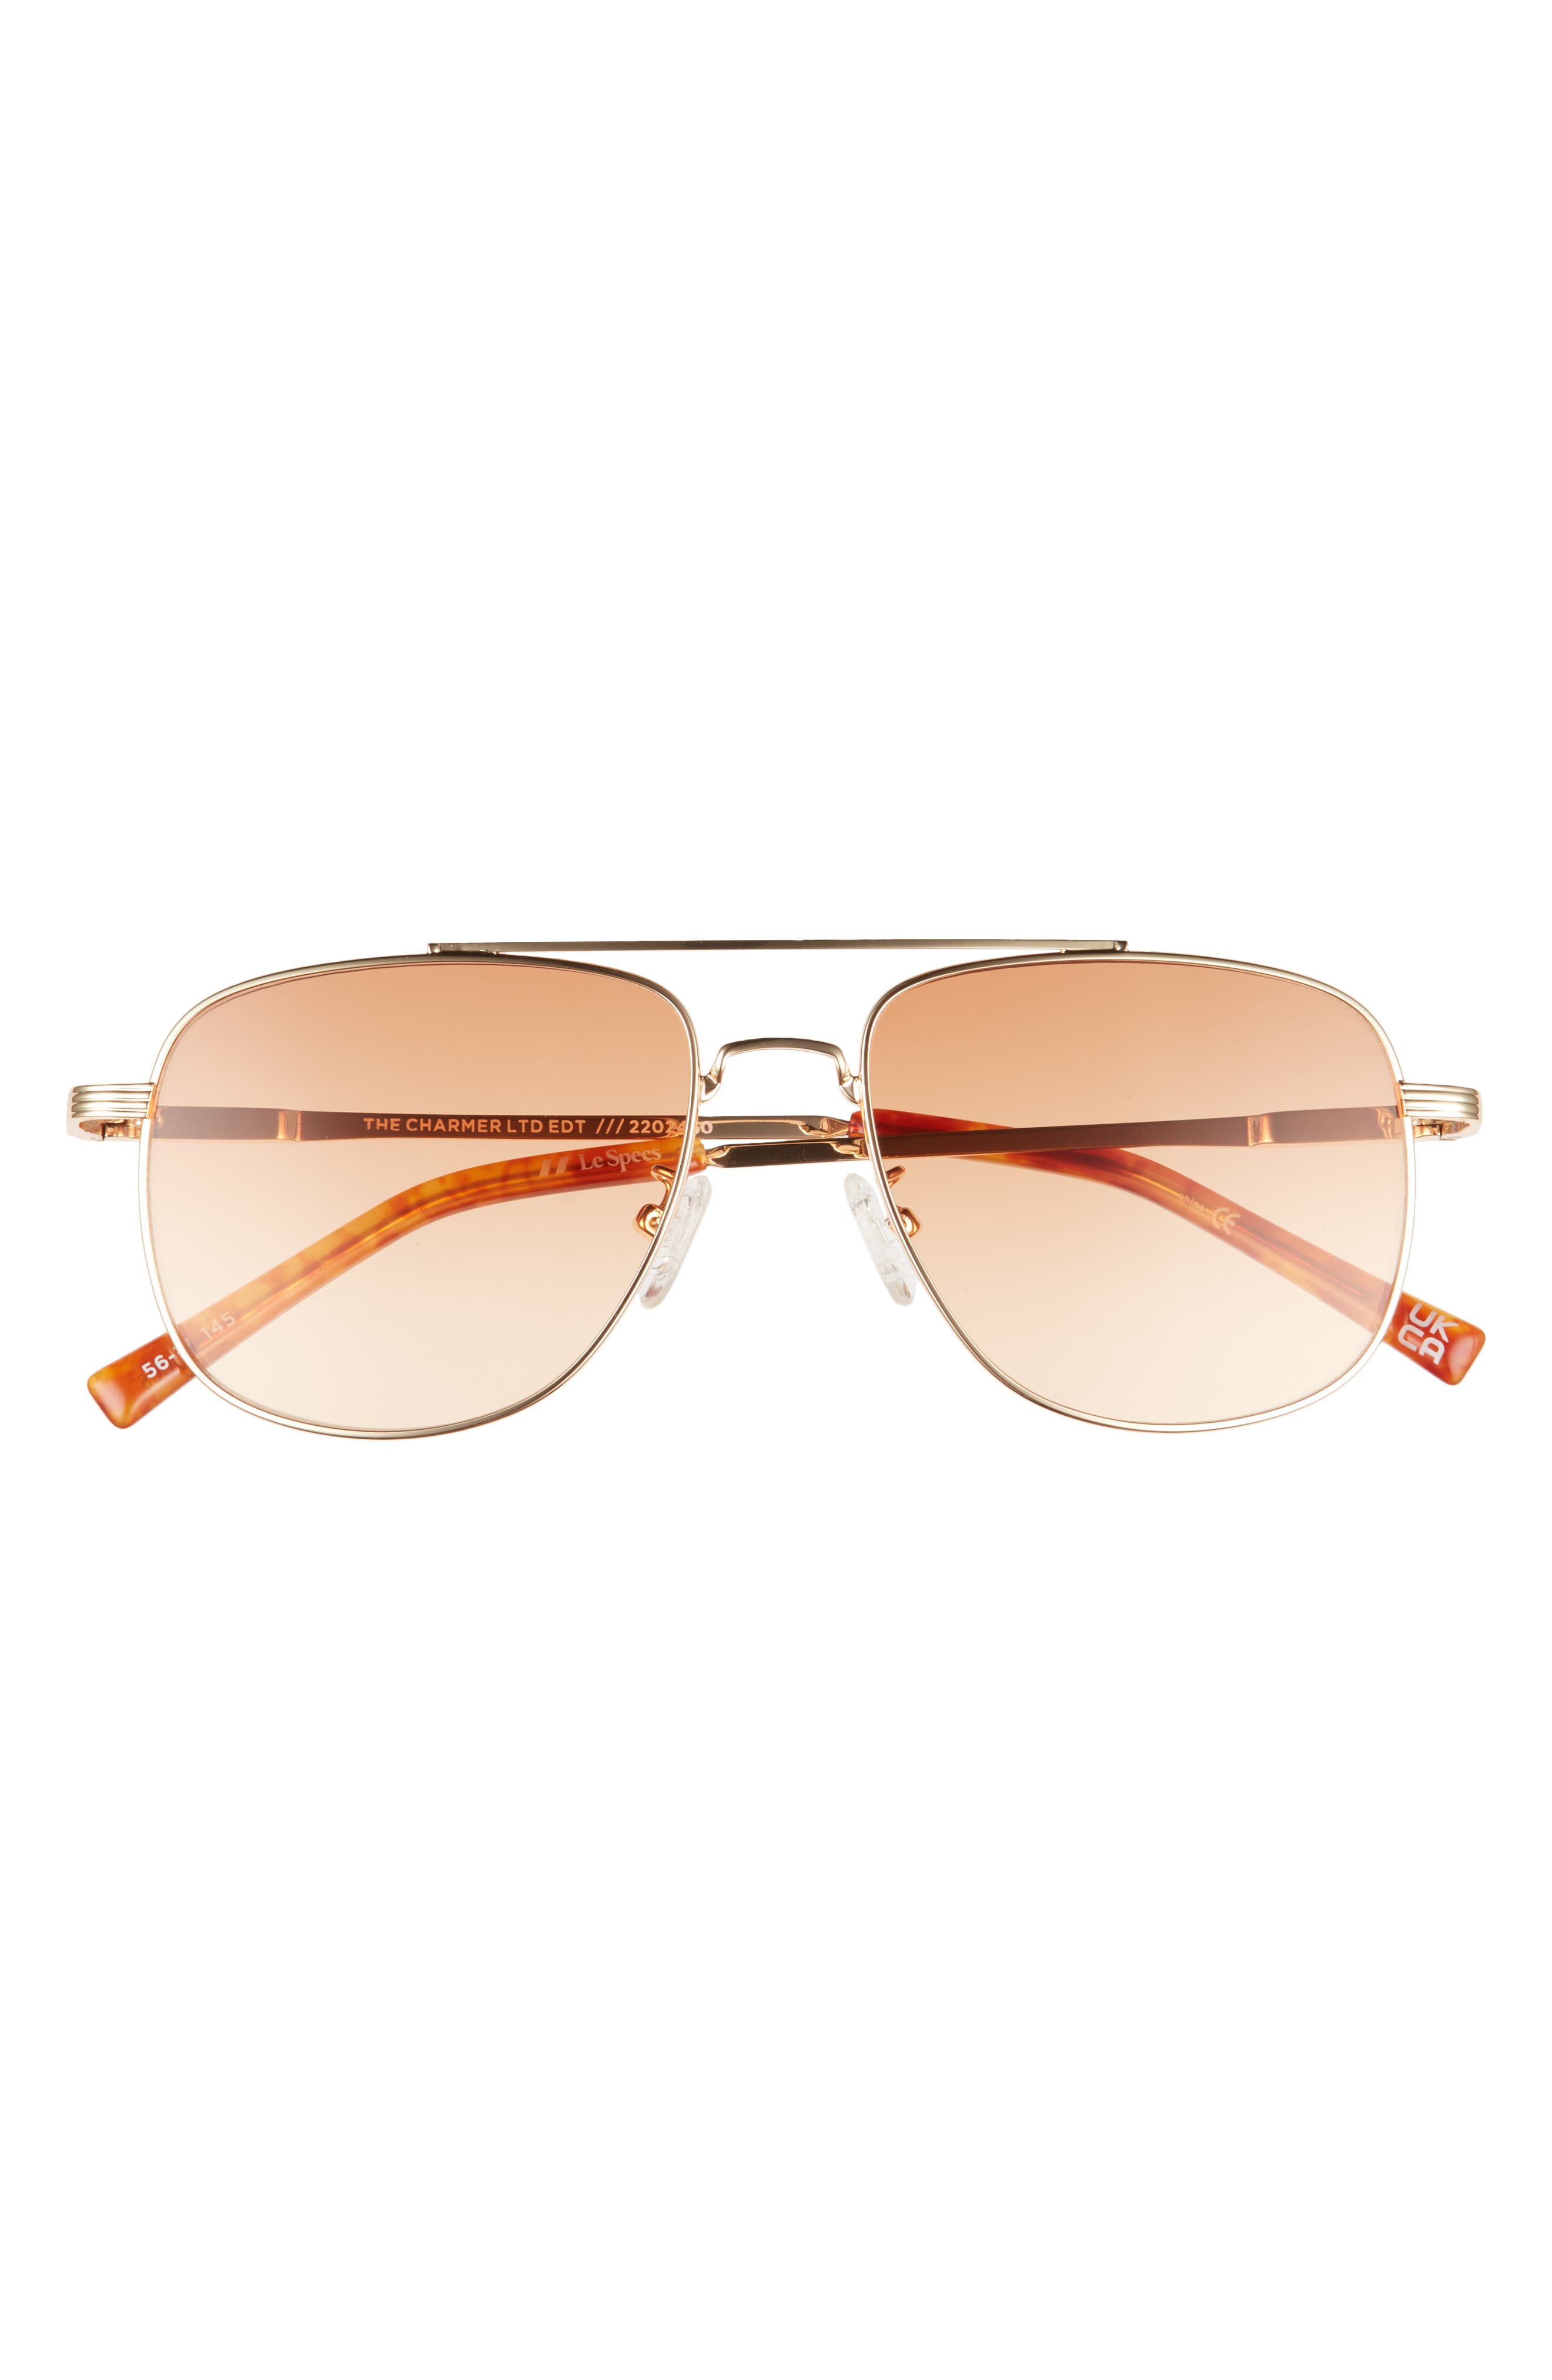 Le Specs The Charmer 56mm Aviator Sunglasses in Bright Gold/Amber Grad at Nordstrom